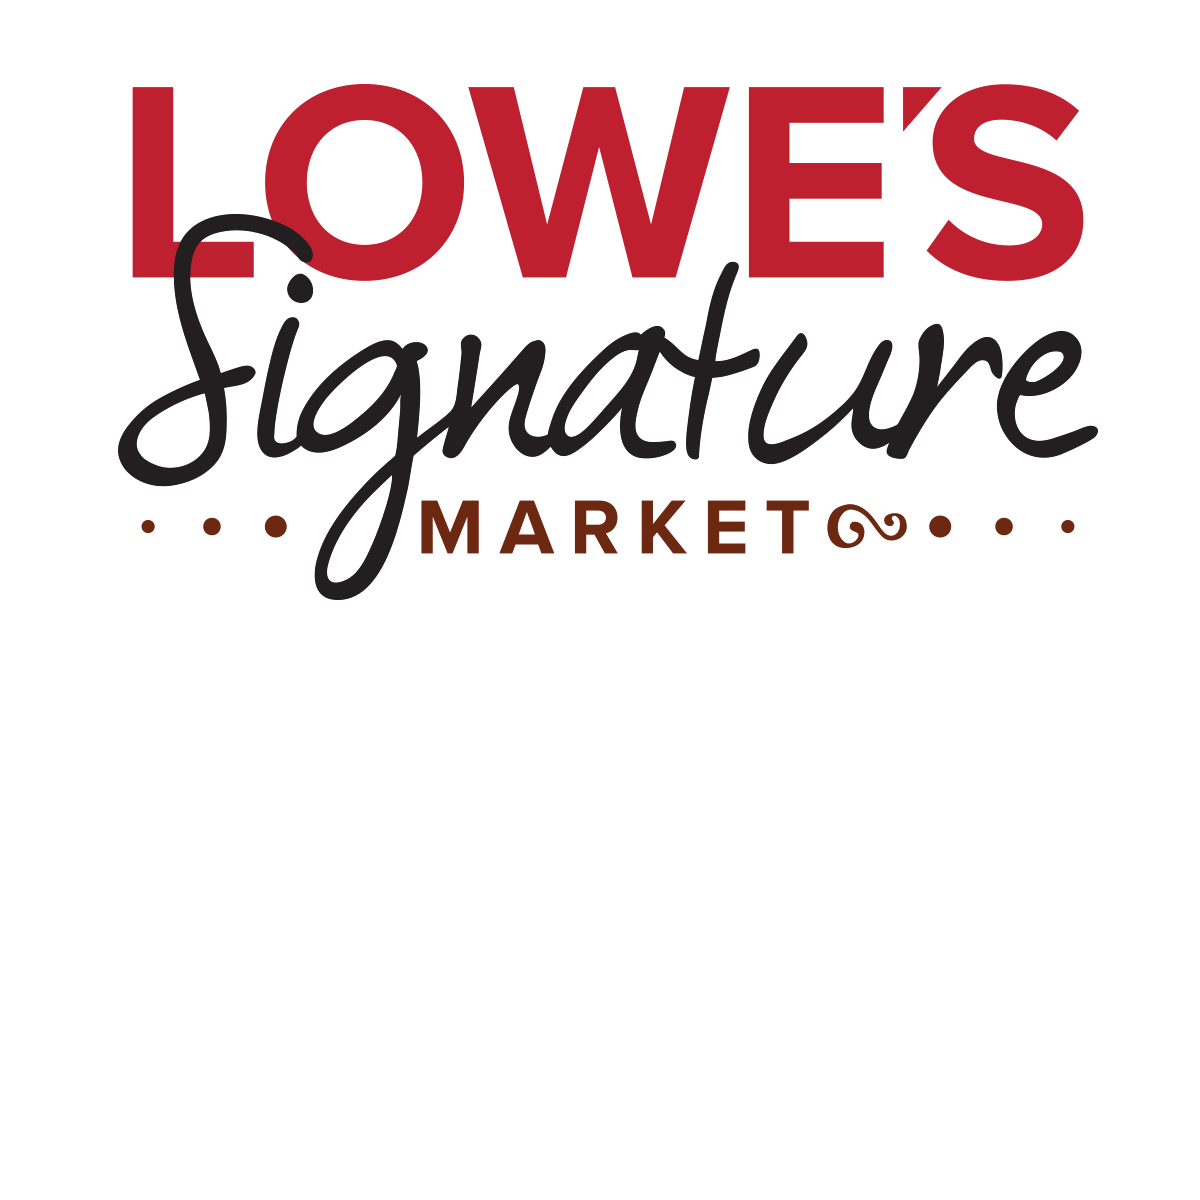 Lowe's Market – Grocery stores in Texas, New Mexico, Arizona, Kansas,  Colorado – Supermarkets is a Littlefield, Texas-based company that has been  serving families since 1963.